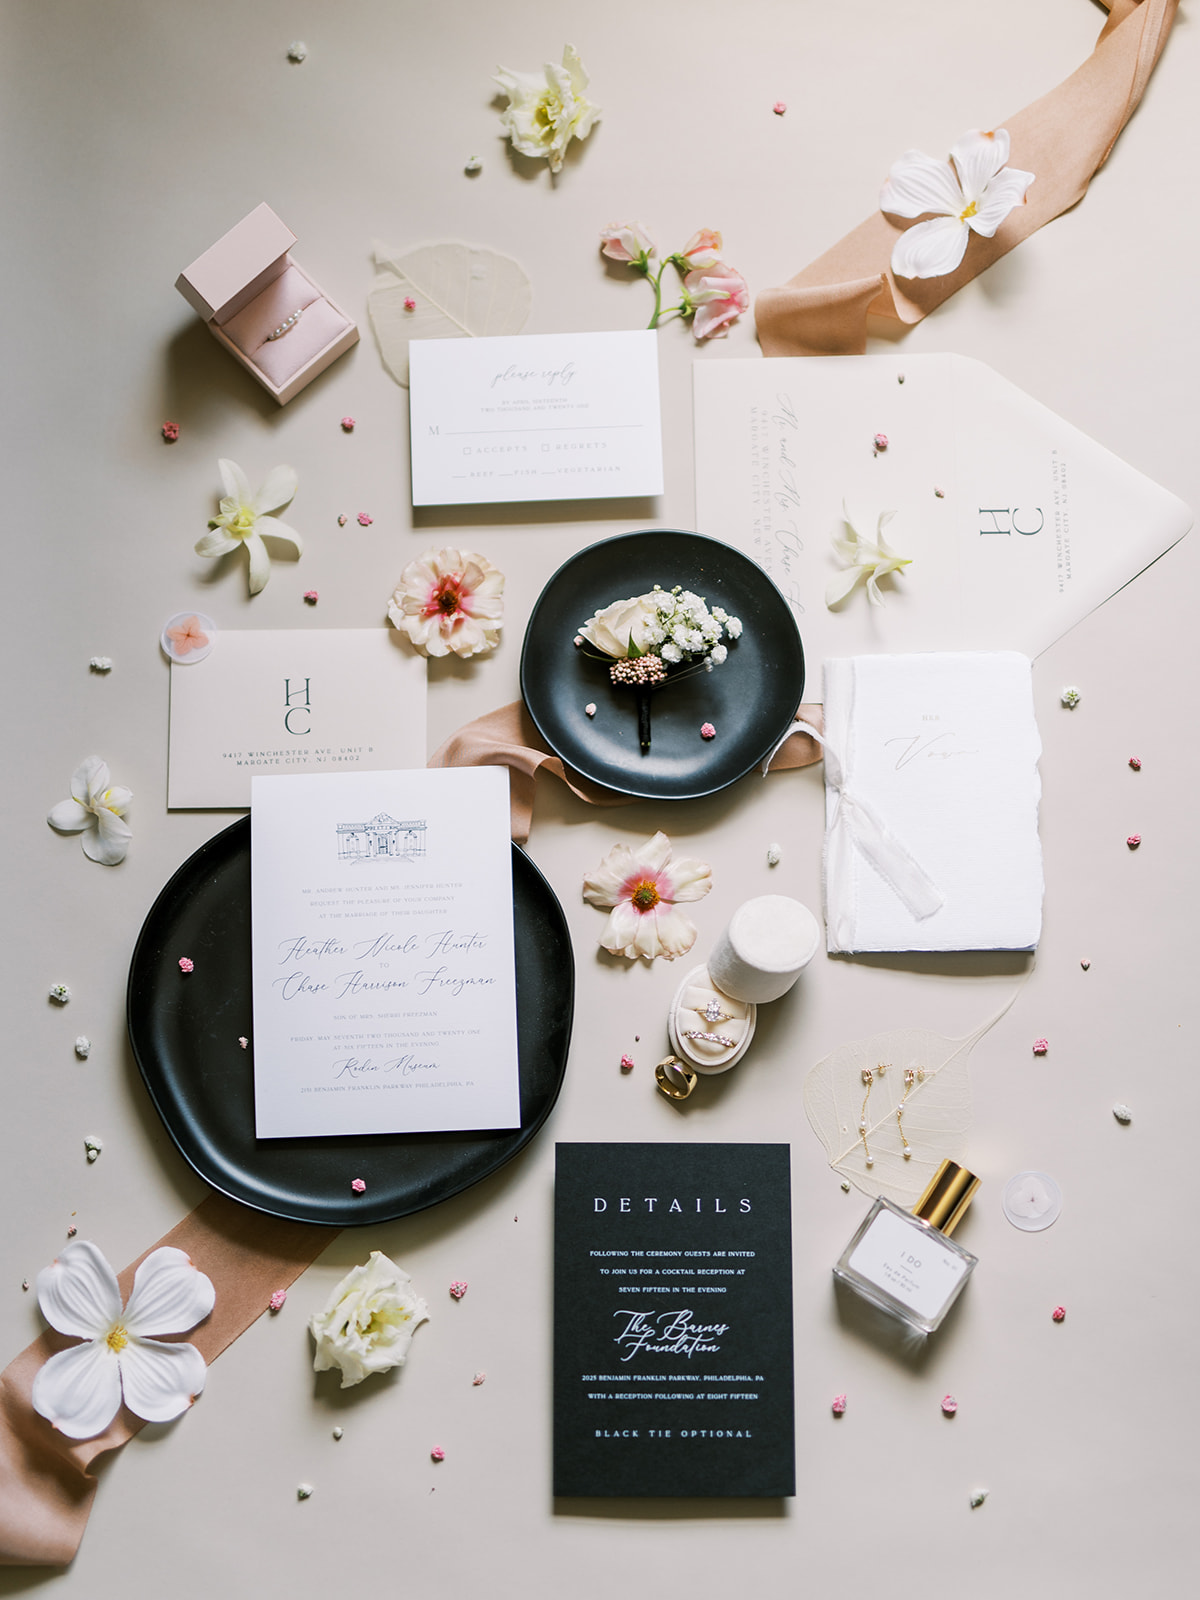 custom-made wedding invitation suite with black, white, and baby pink details bu Love Haus Events